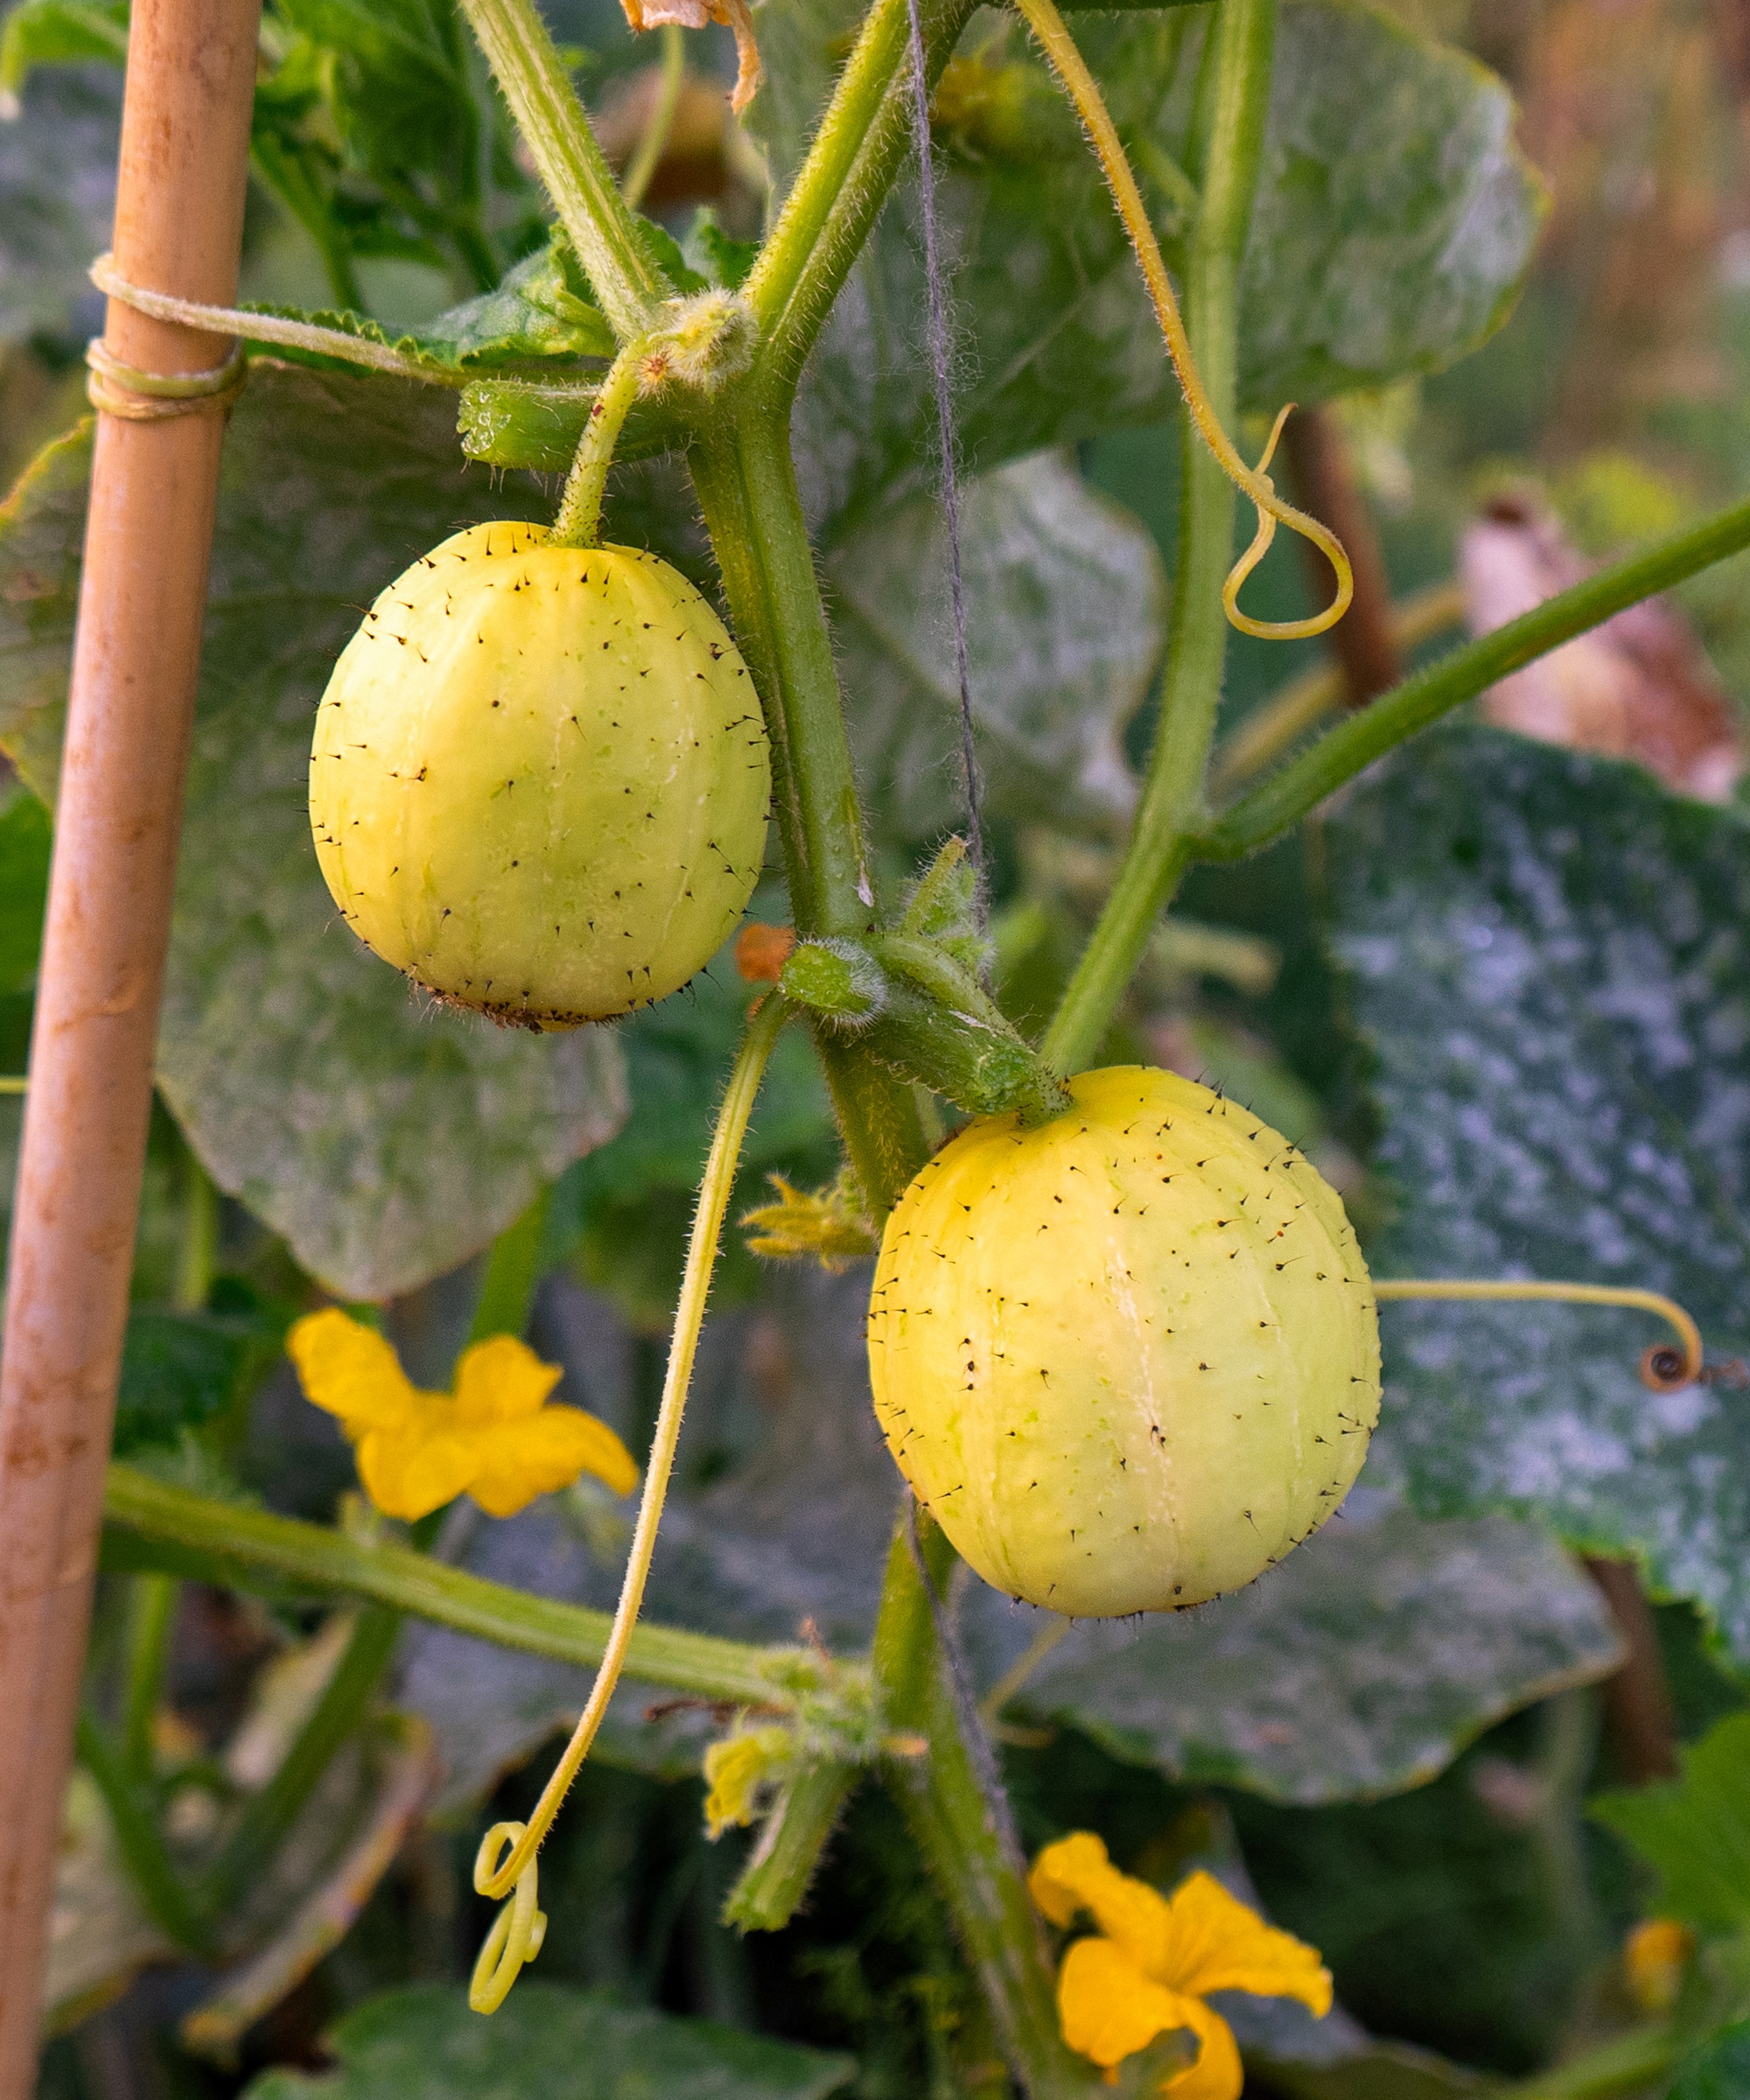 'Crystal Lemon' cucumbers are ideal for a climate resilient vegetable garden